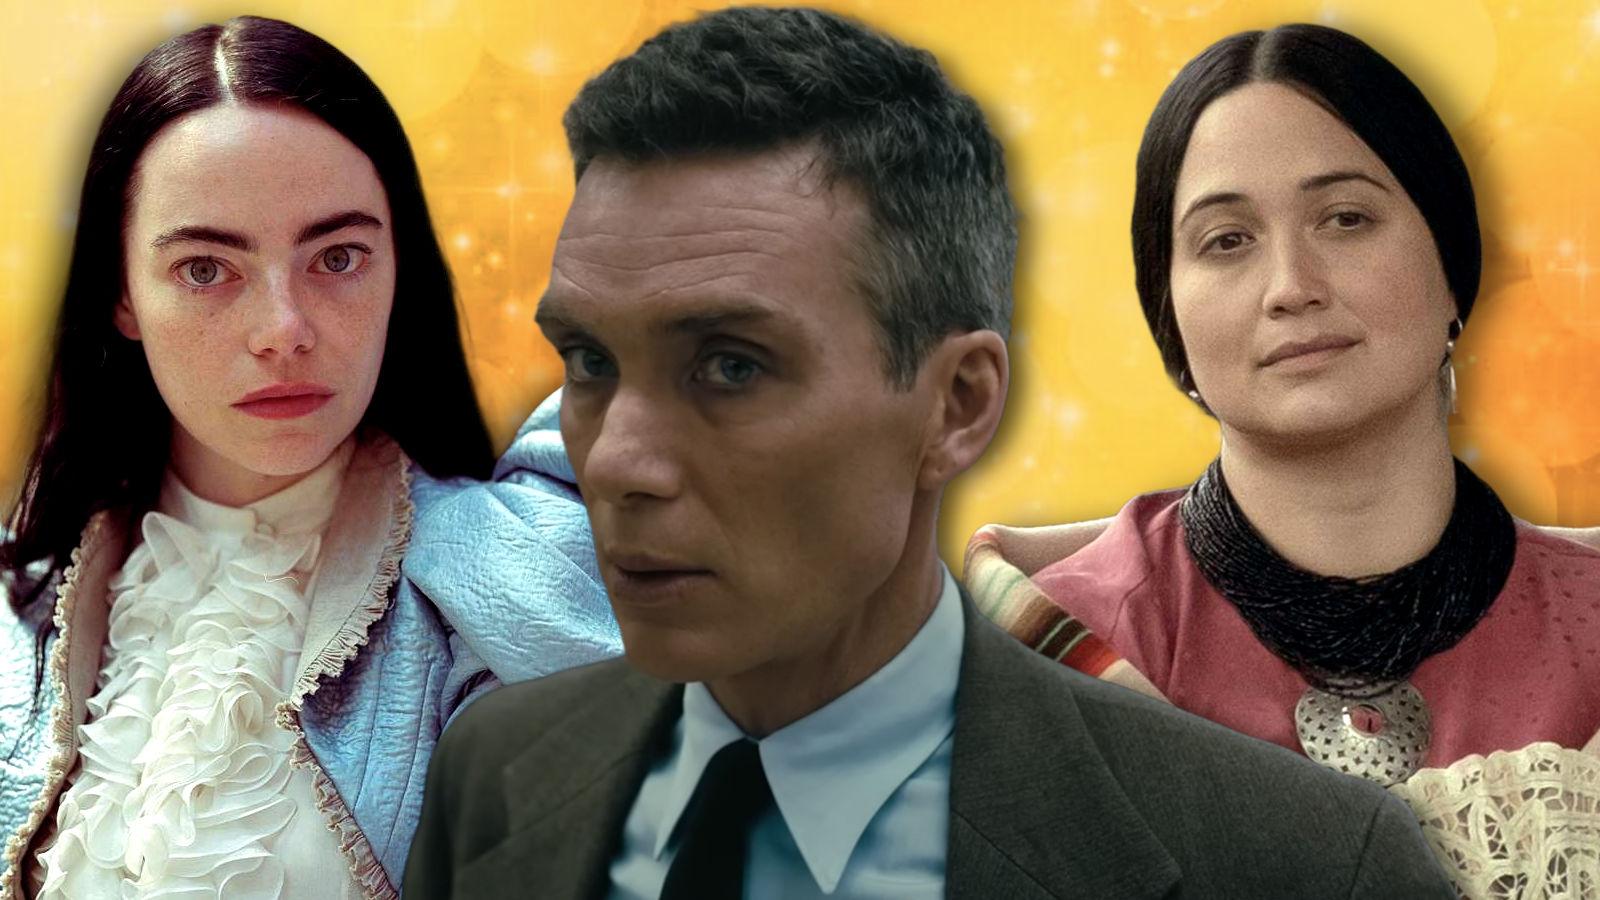 Emma Stone in Poor Things, Cillian Murphy in Oppenheimer, and Lily Gladstone in Killers of the Flower Moon